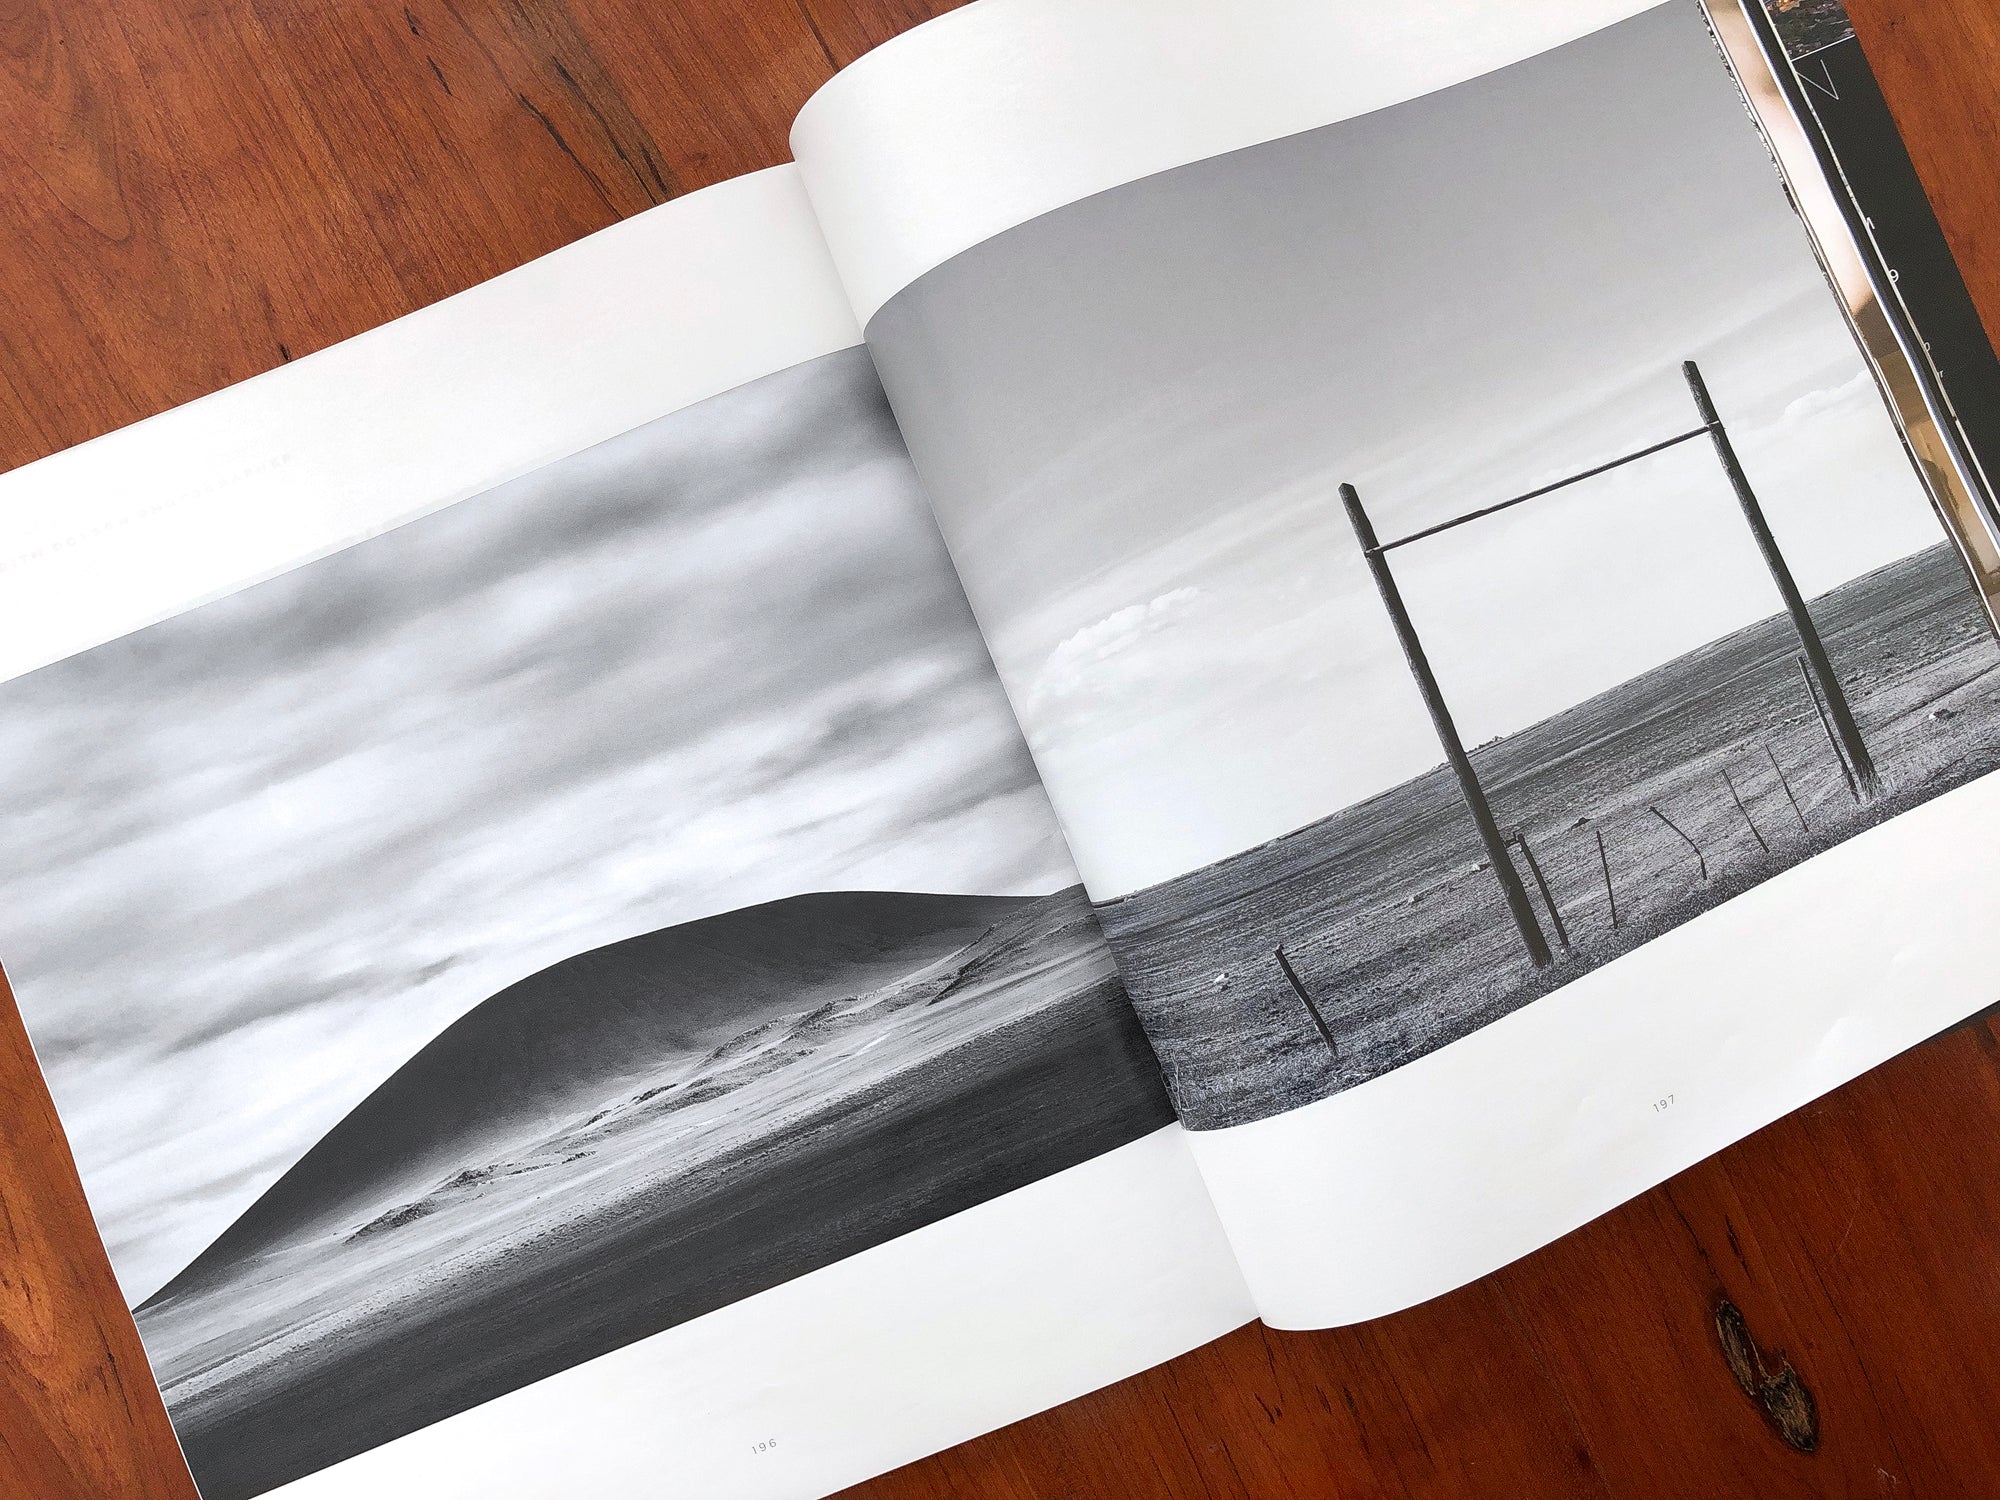 A spread from Santa Fe Magazine featuring two black and white landscape photographs shot in New Mexico